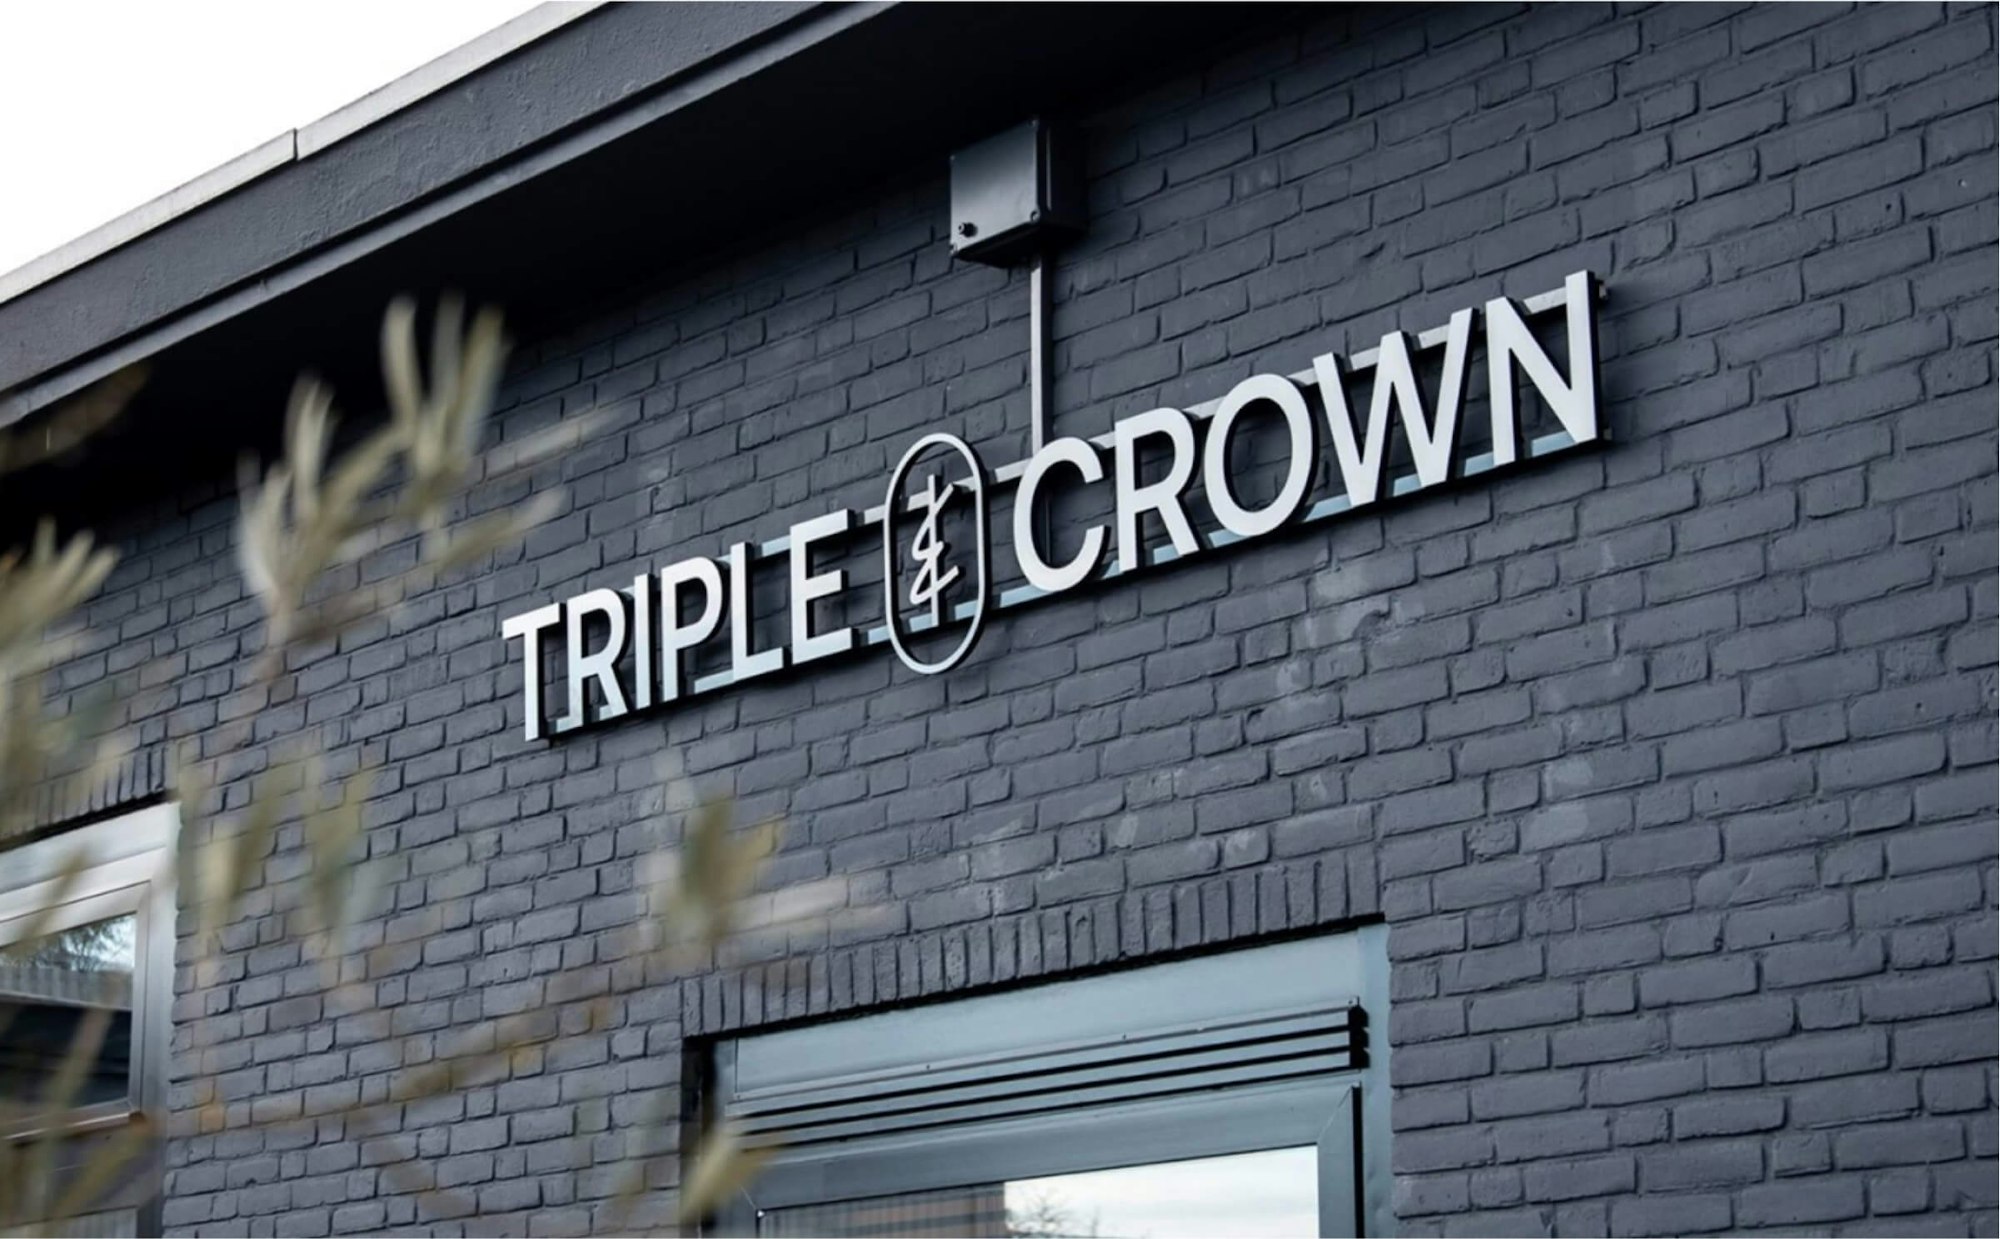 Triple and crown signage logo